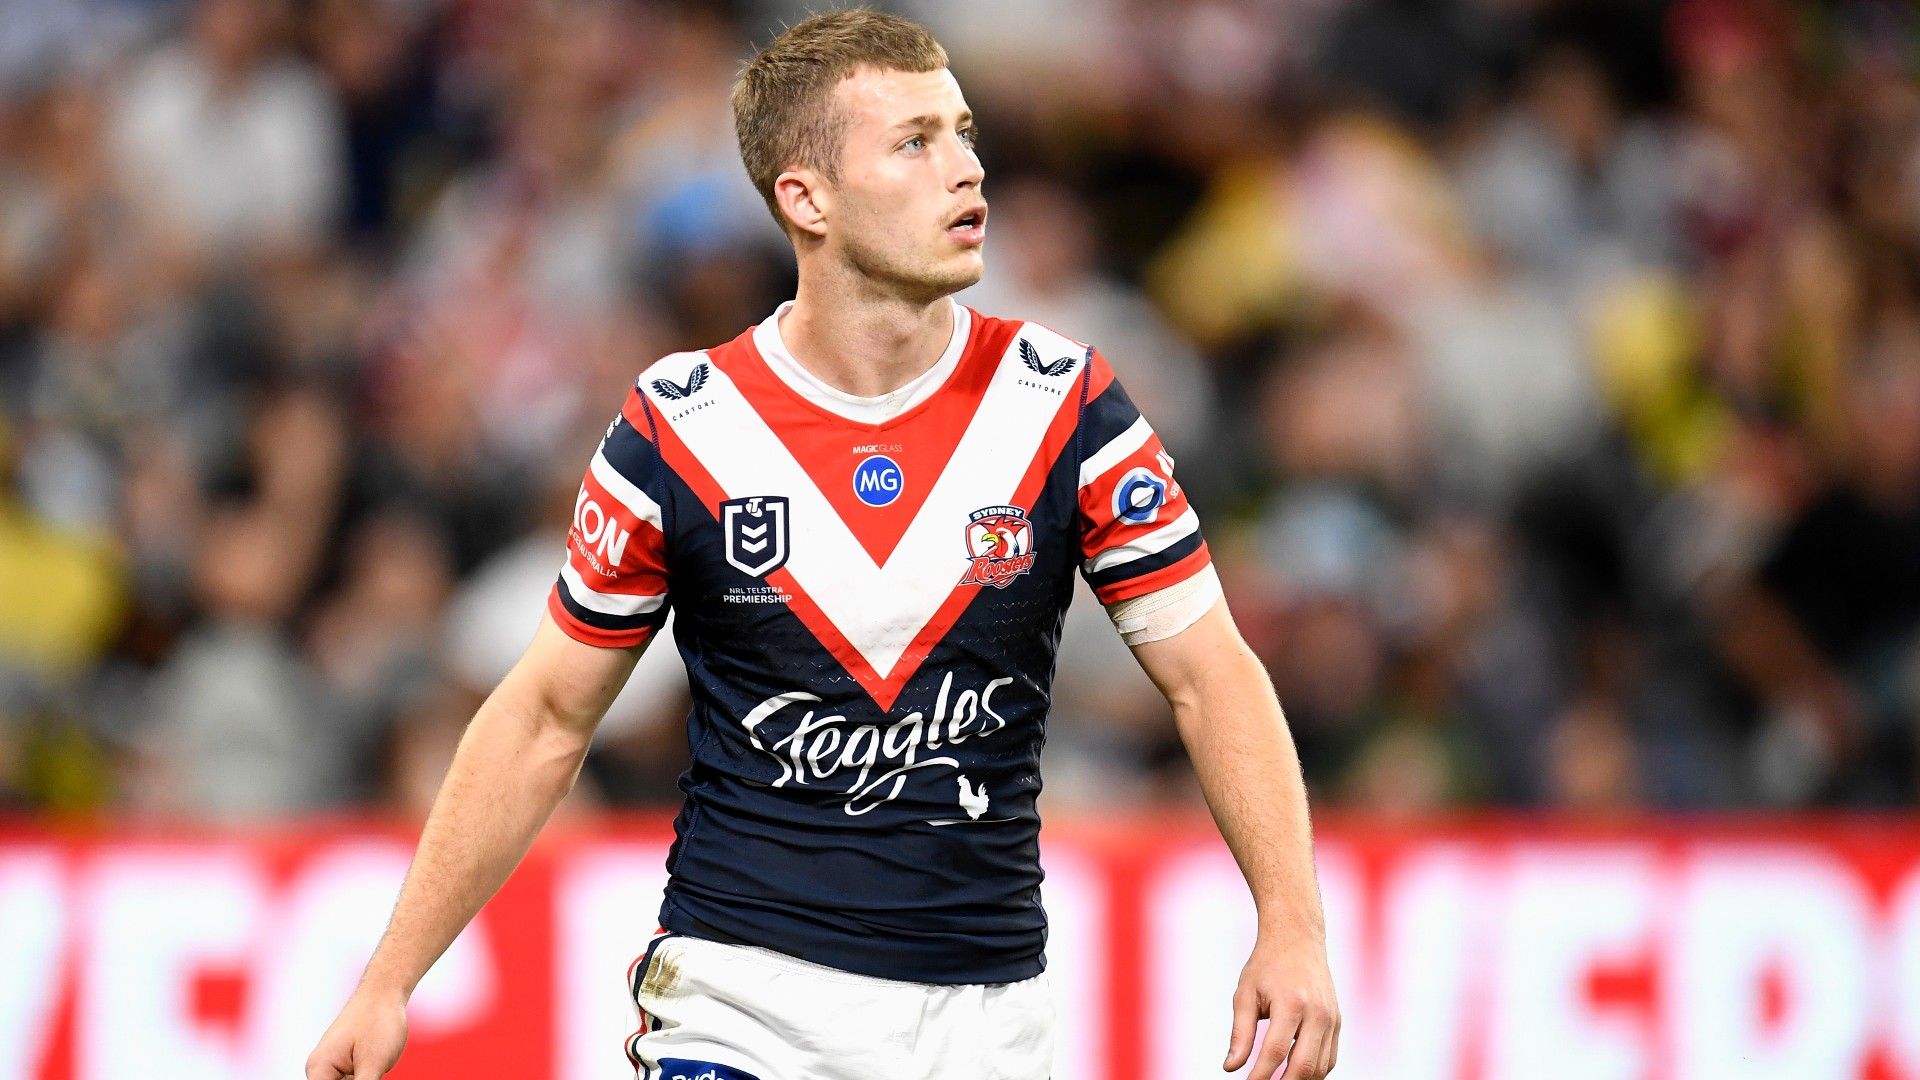 Club legend caught up in awkward Roosters selection saga after young gun axed